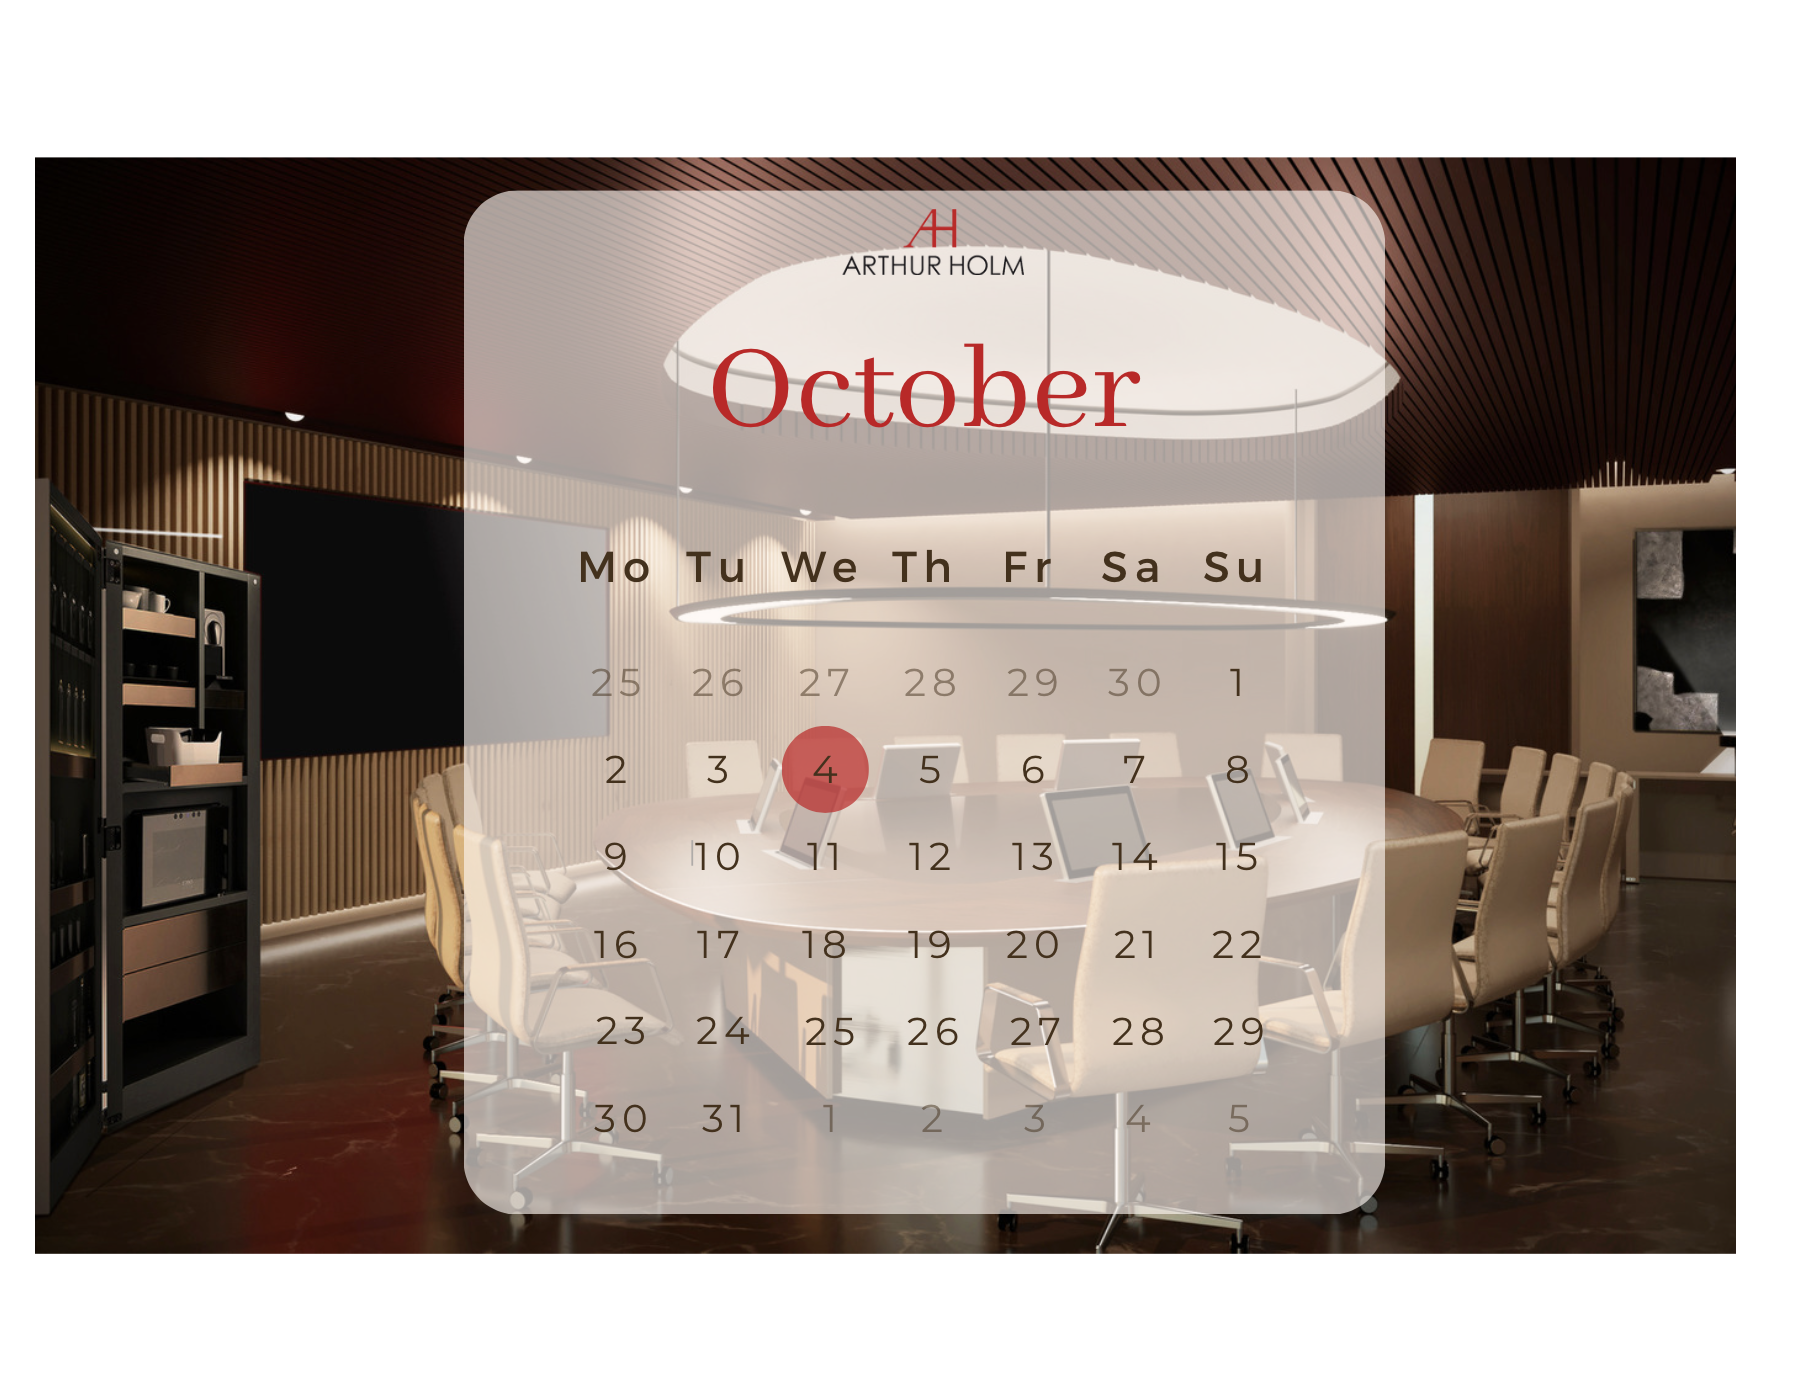 What’s on in October?